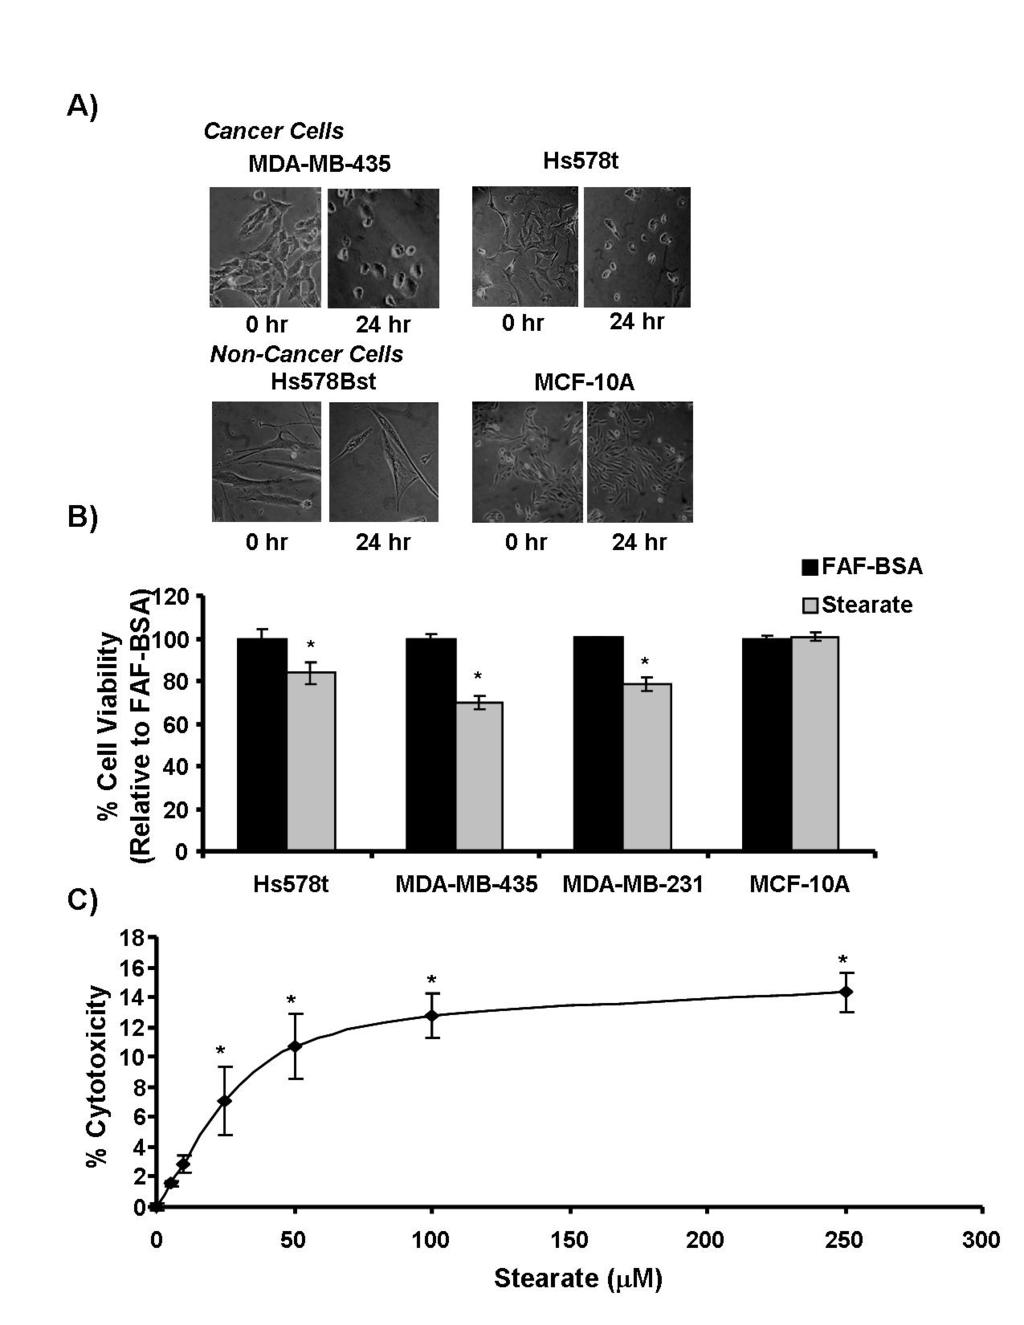 Figure 3-2: Stearate Decreased the Viability of the Human Breast Cancer Cells.